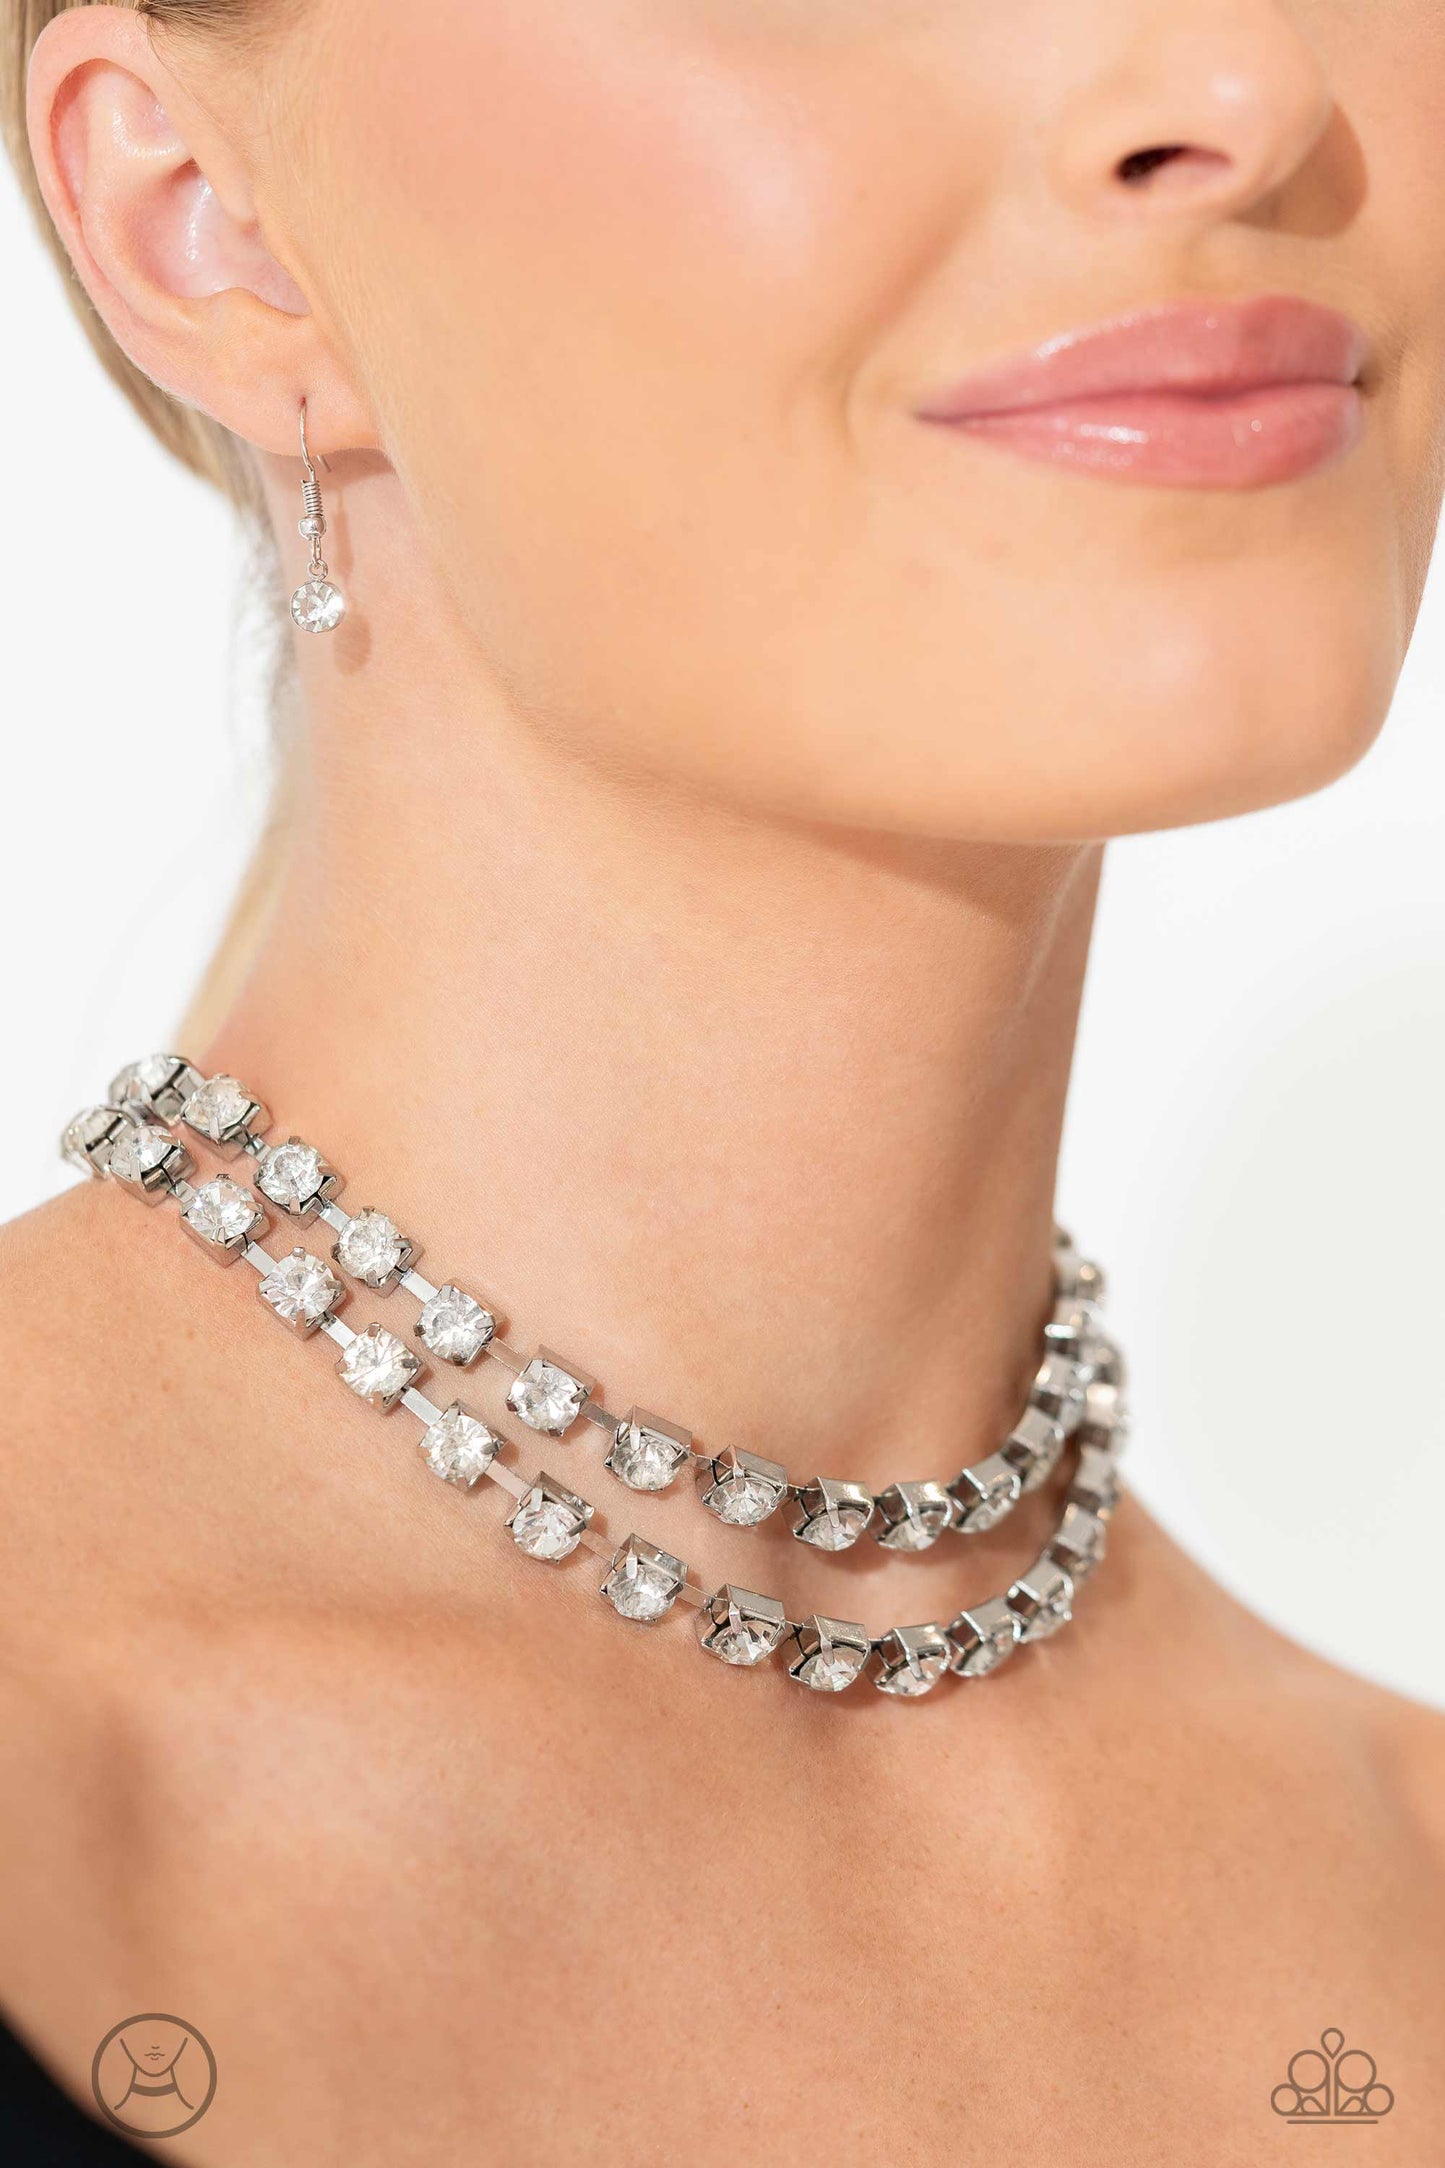 Glistening Gallery White Rhinestone Choker Necklace - Paparazzi Accessories  Featuring pronged silver fittings, strands of oversized, glittery white rhinestones connect with rows of silver box chains around the neck for a glittery twist. Features an adjustable clasp closure.  Sold as one individual choker necklace. Includes one pair of matching earrings.  P2CH-WTXX-070XX